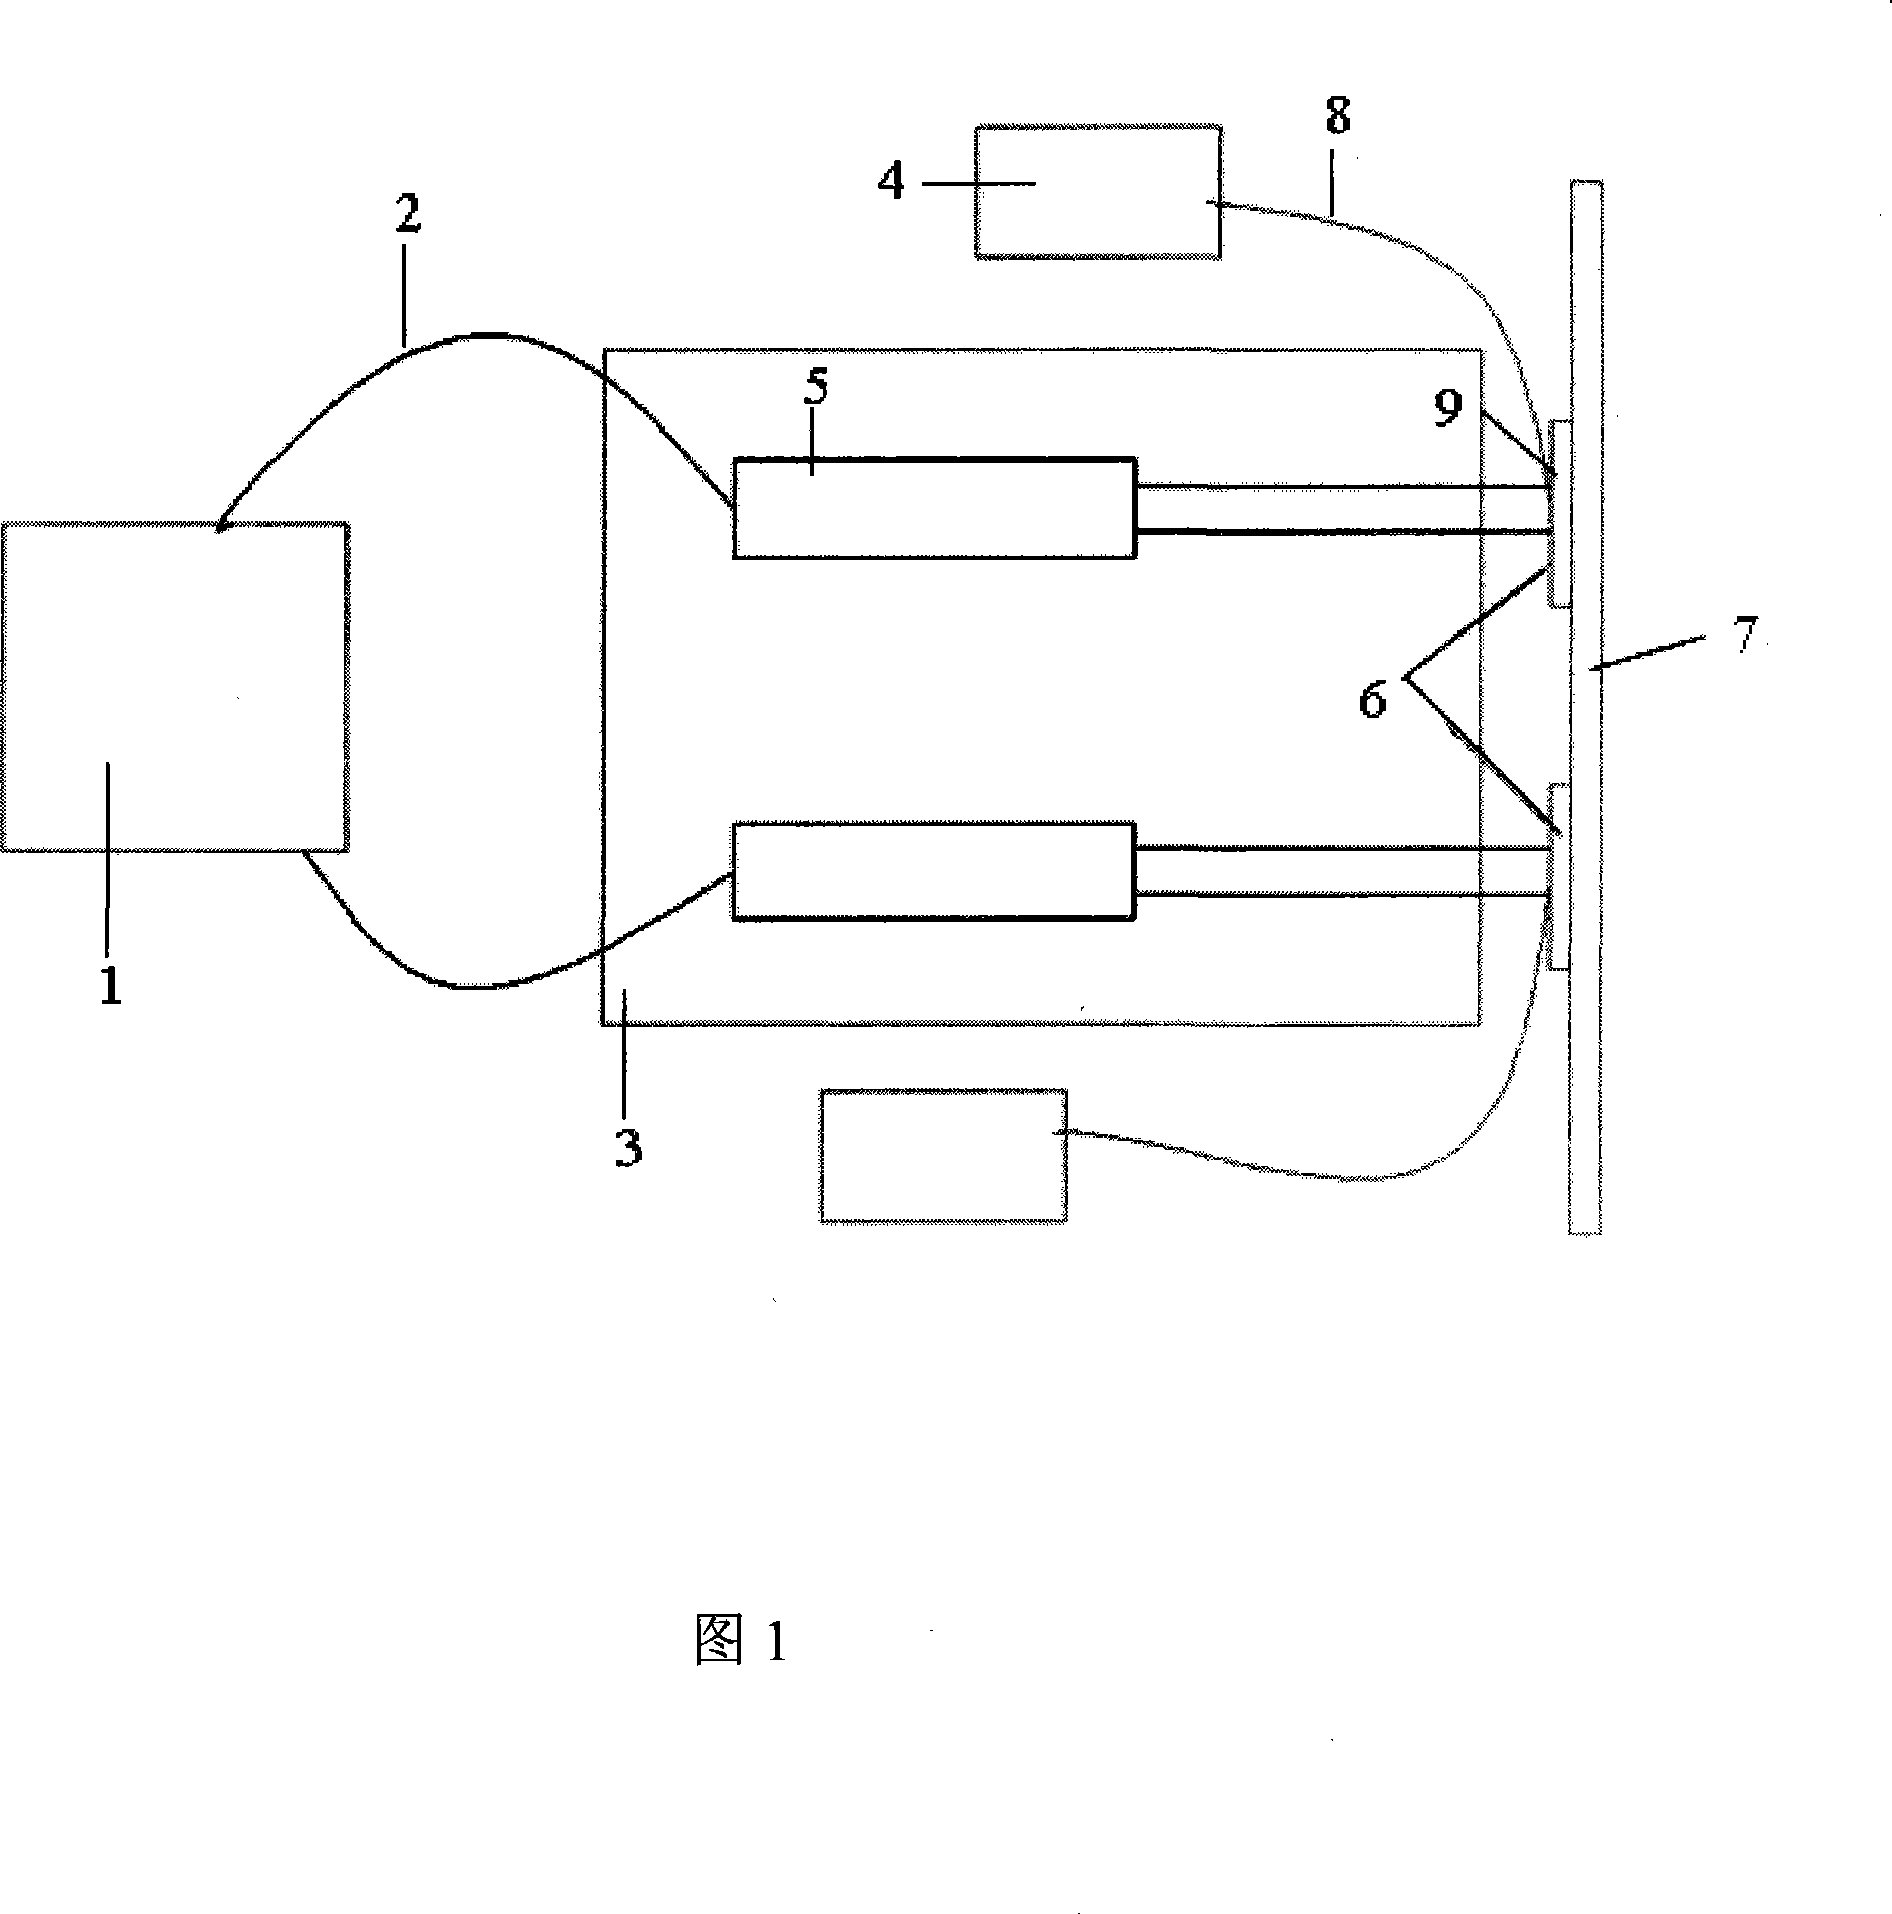 Vehicle sideslip door propulsion experimental rig as well as testing method thereof